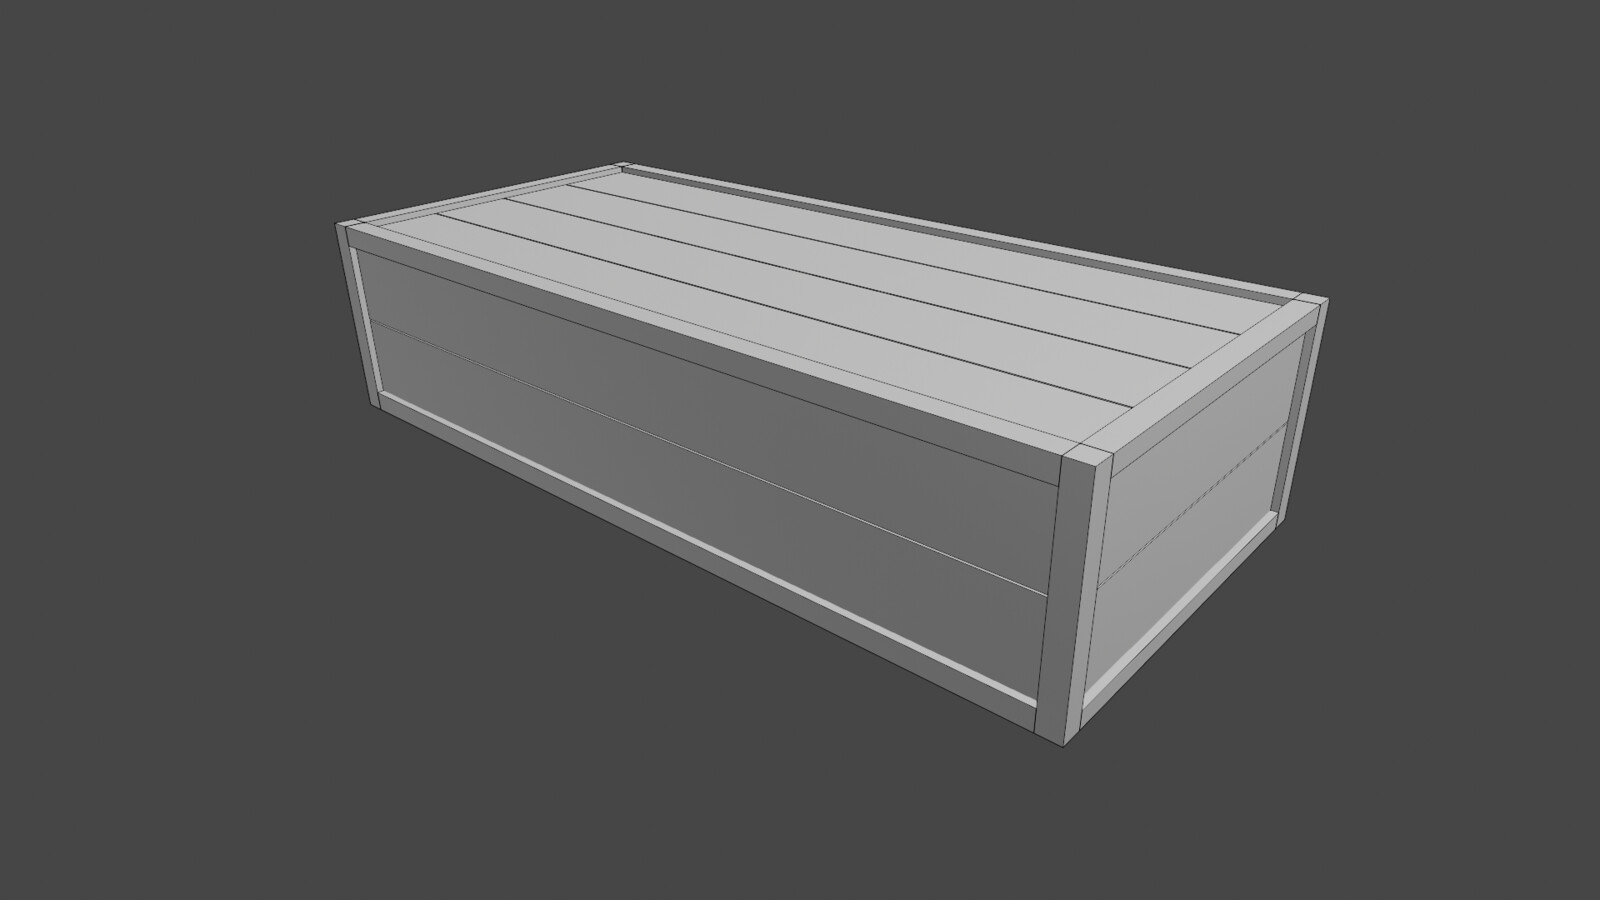 Wooden Crate 3 Wireframe